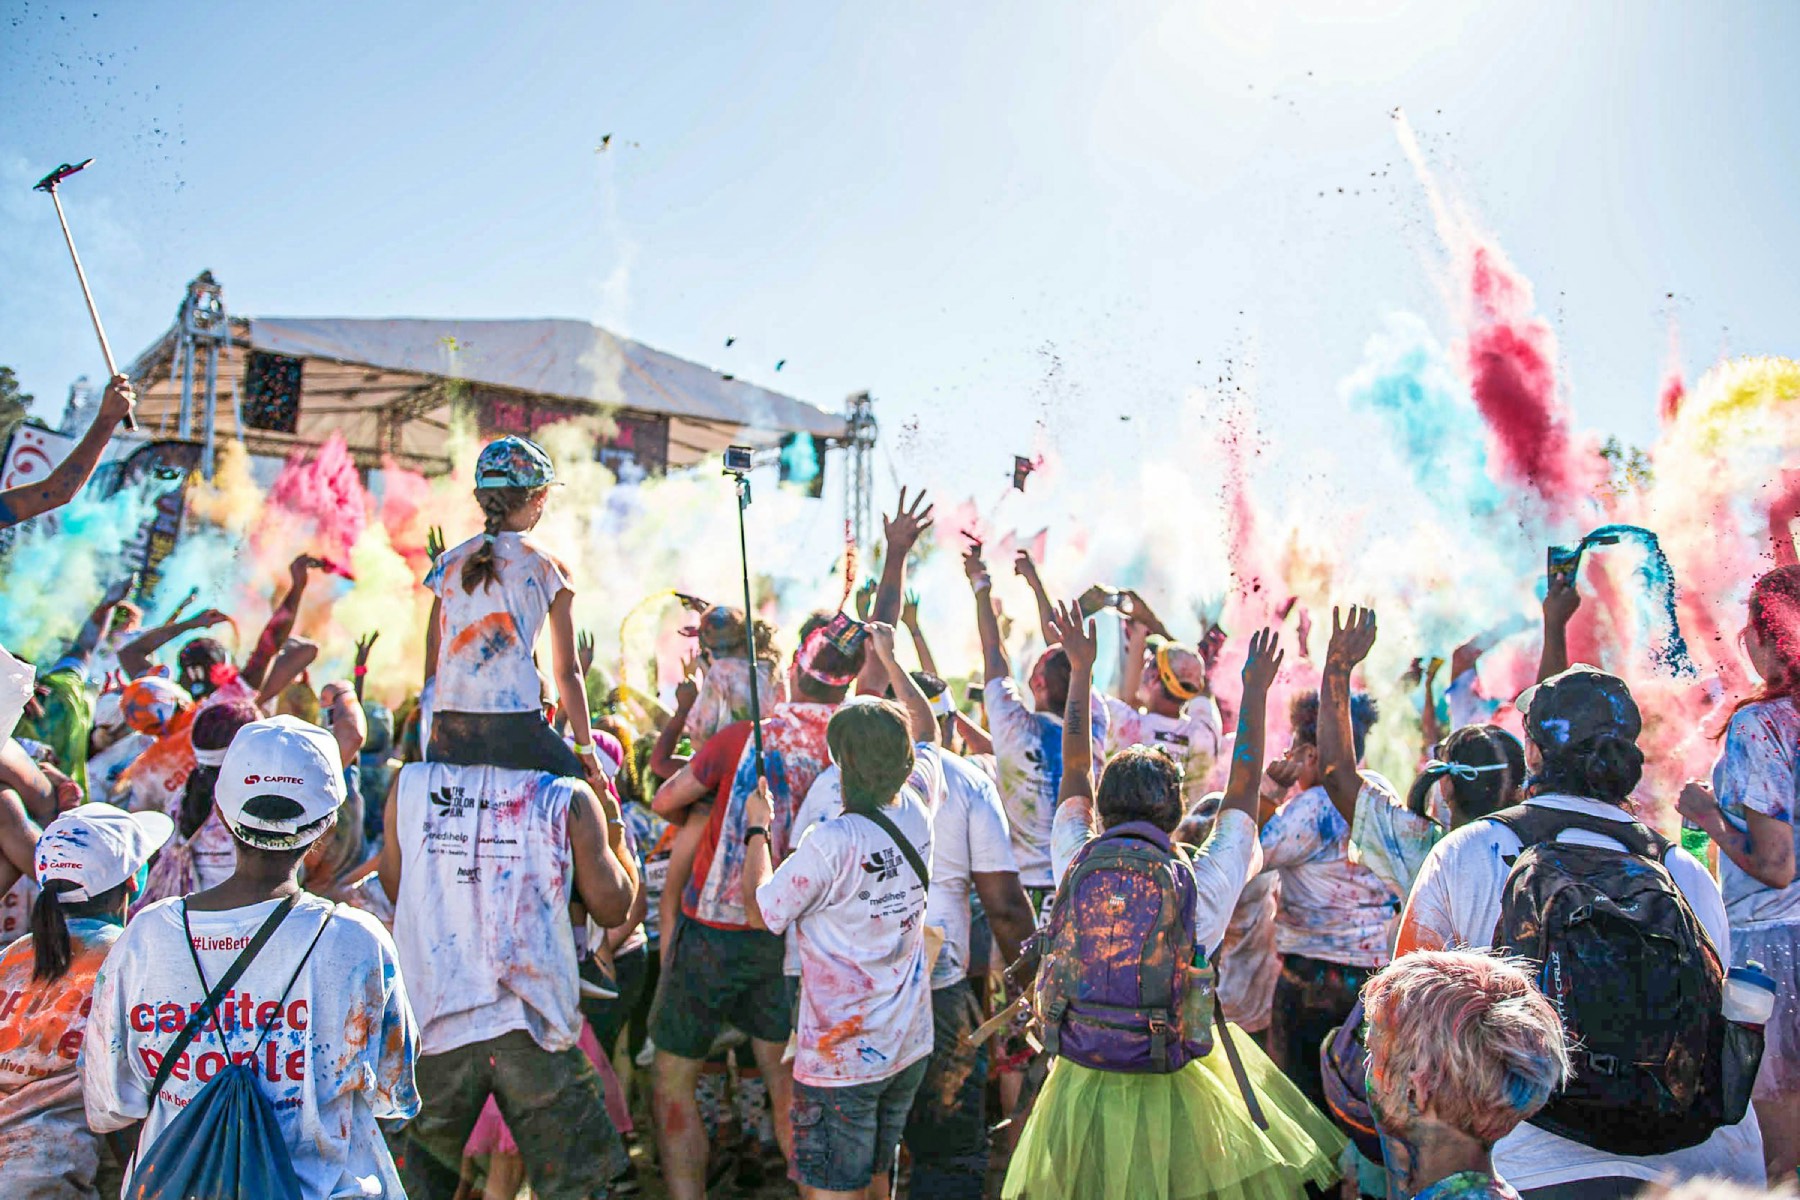 Annual Balekela Umbala (Color Run) with the backs of runners splashed with colors